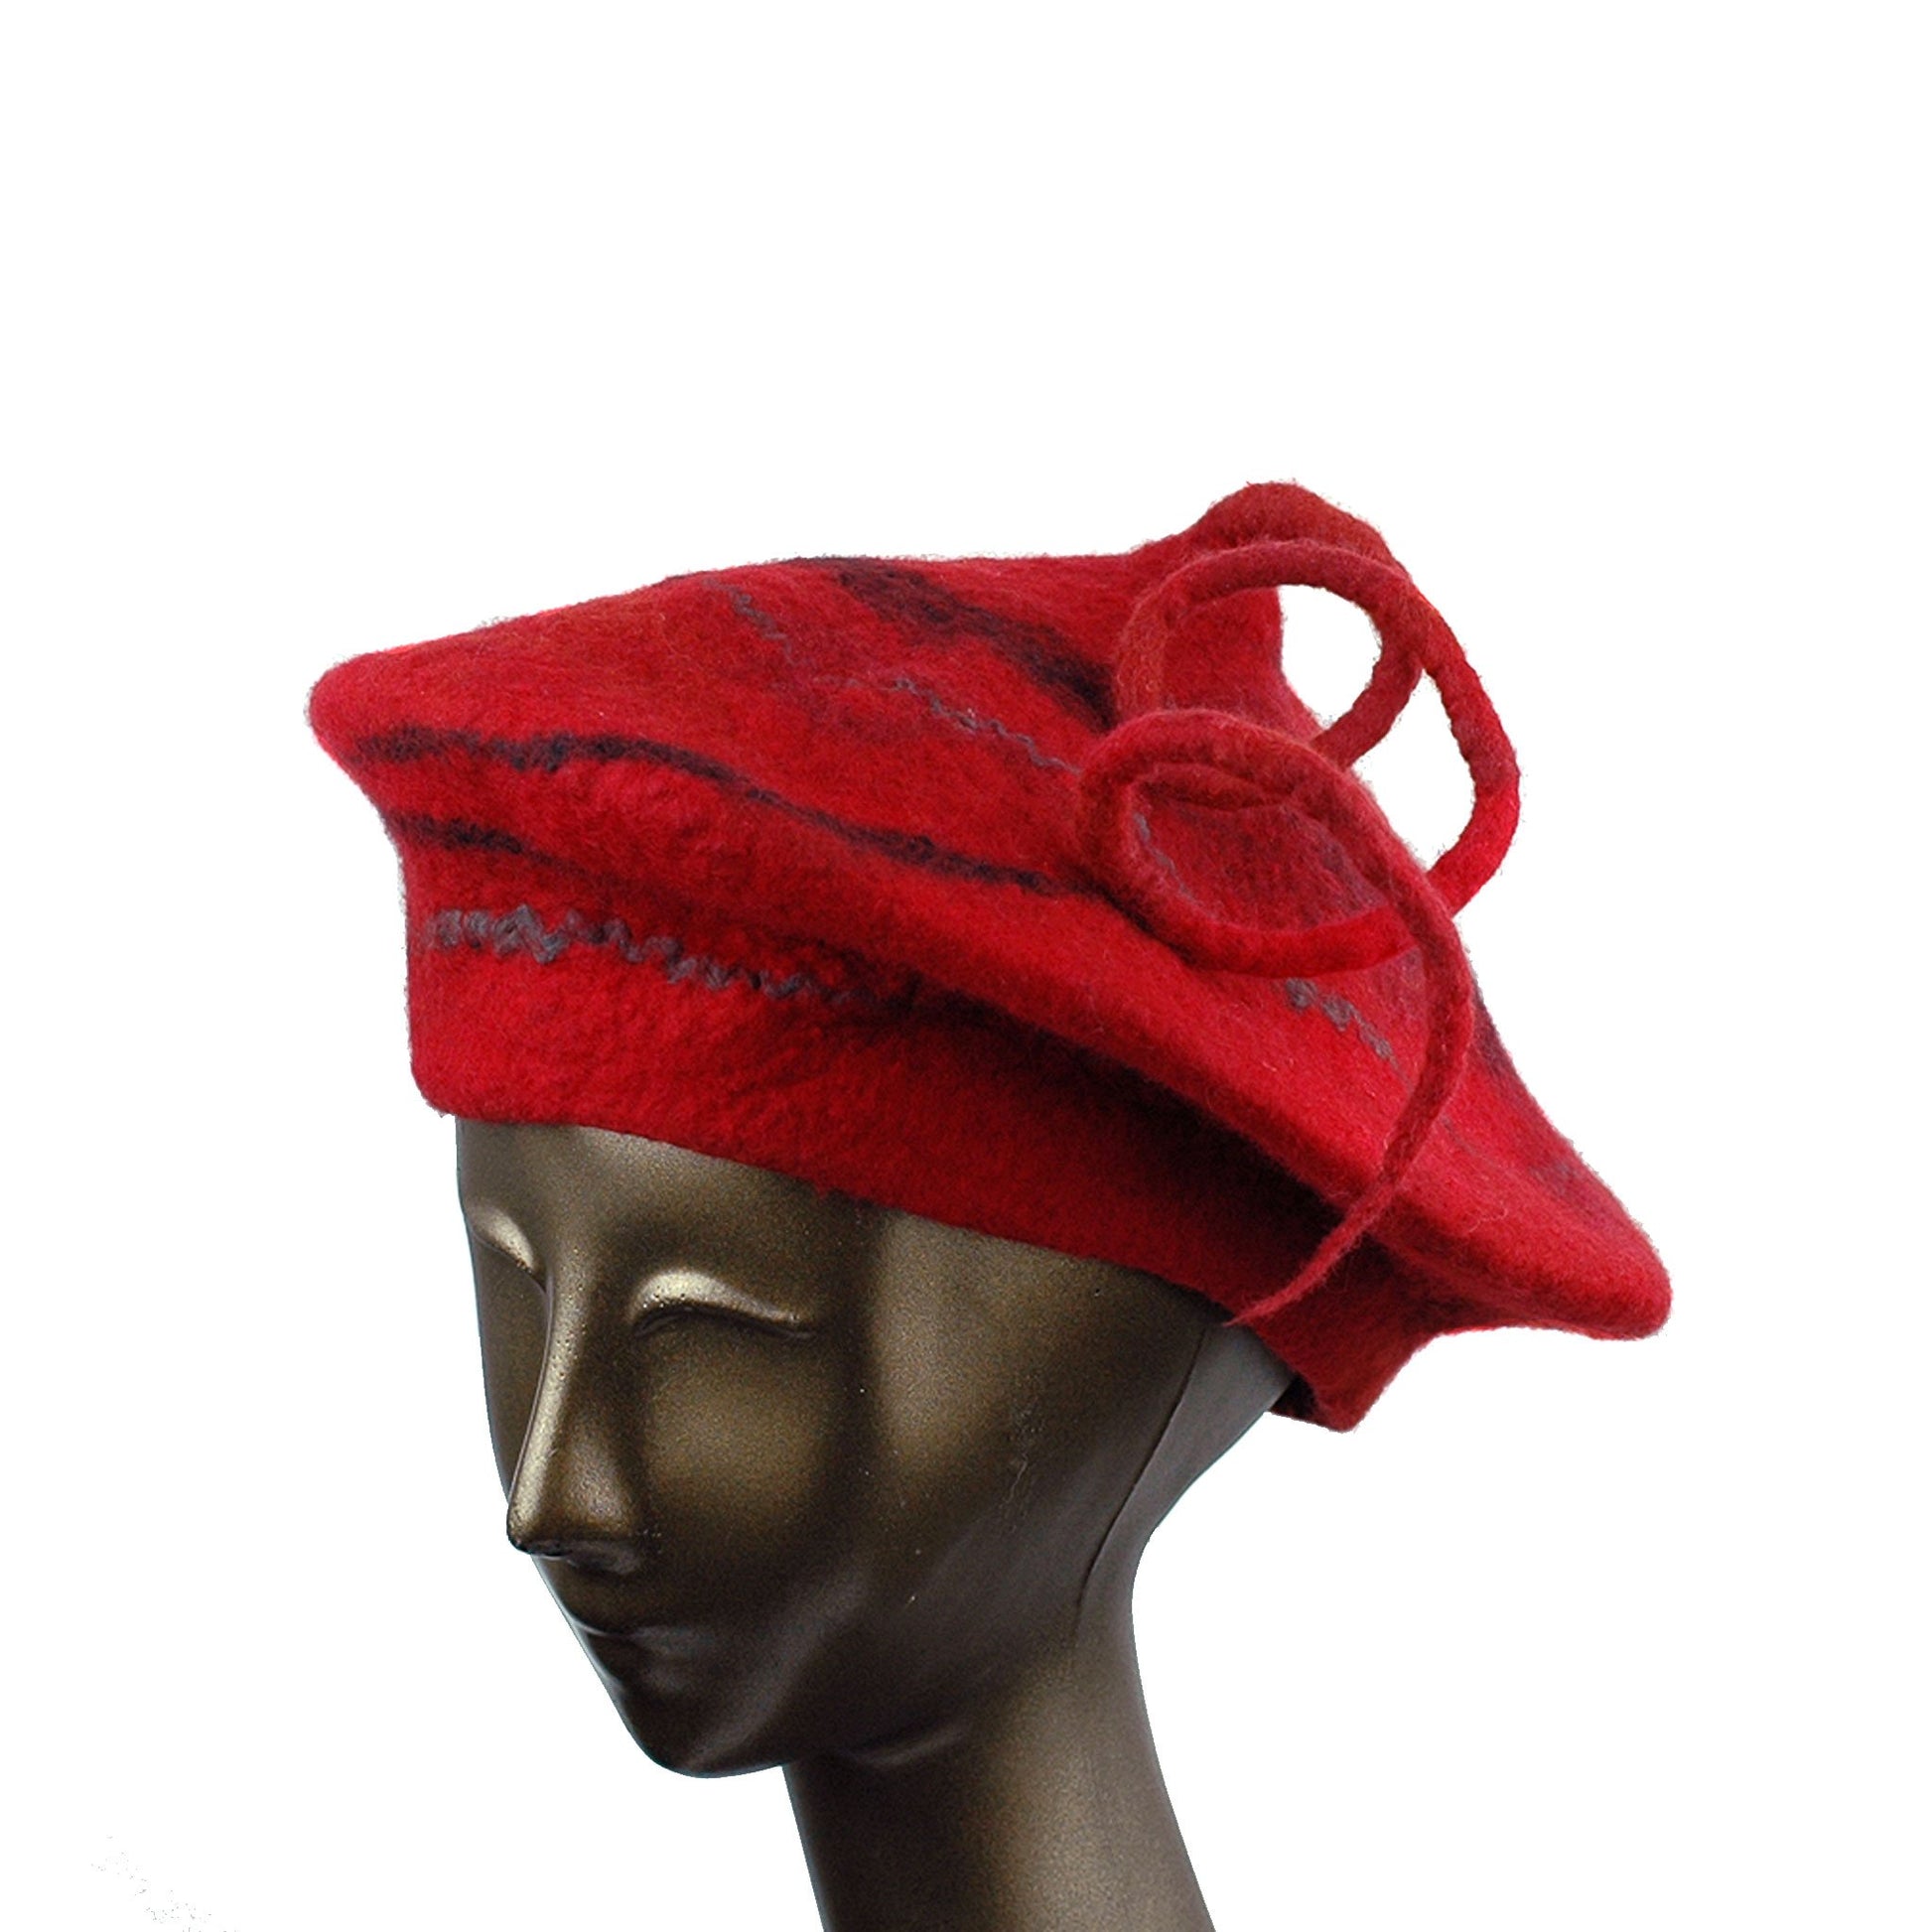 Red Beret with Black Swirl and Long Curlicue - three quarters view